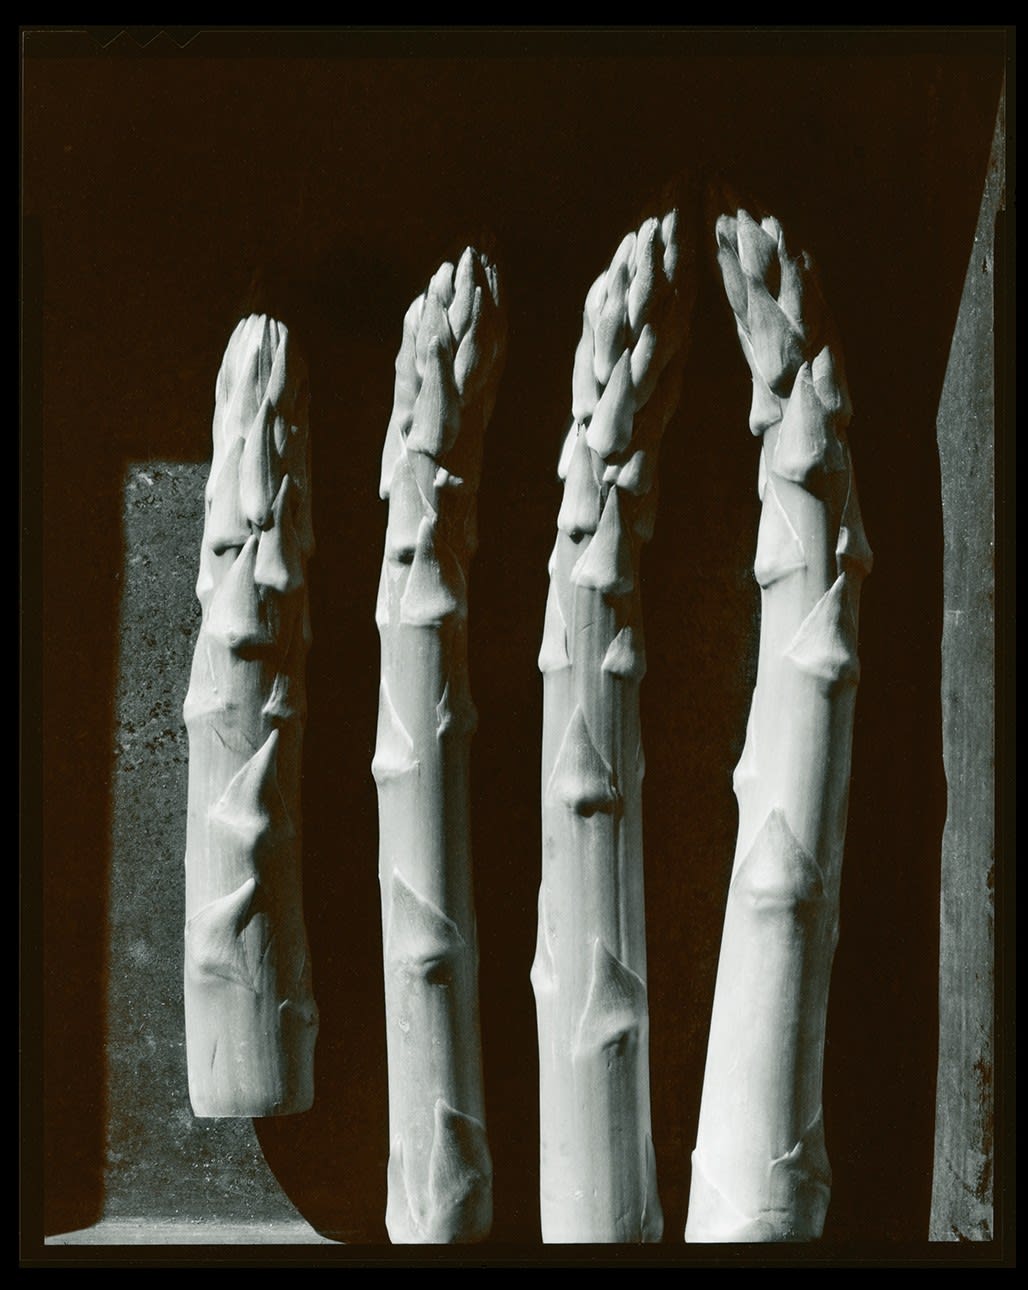 Olivia Parker, Asparagus from the series Signs of Life, 1976